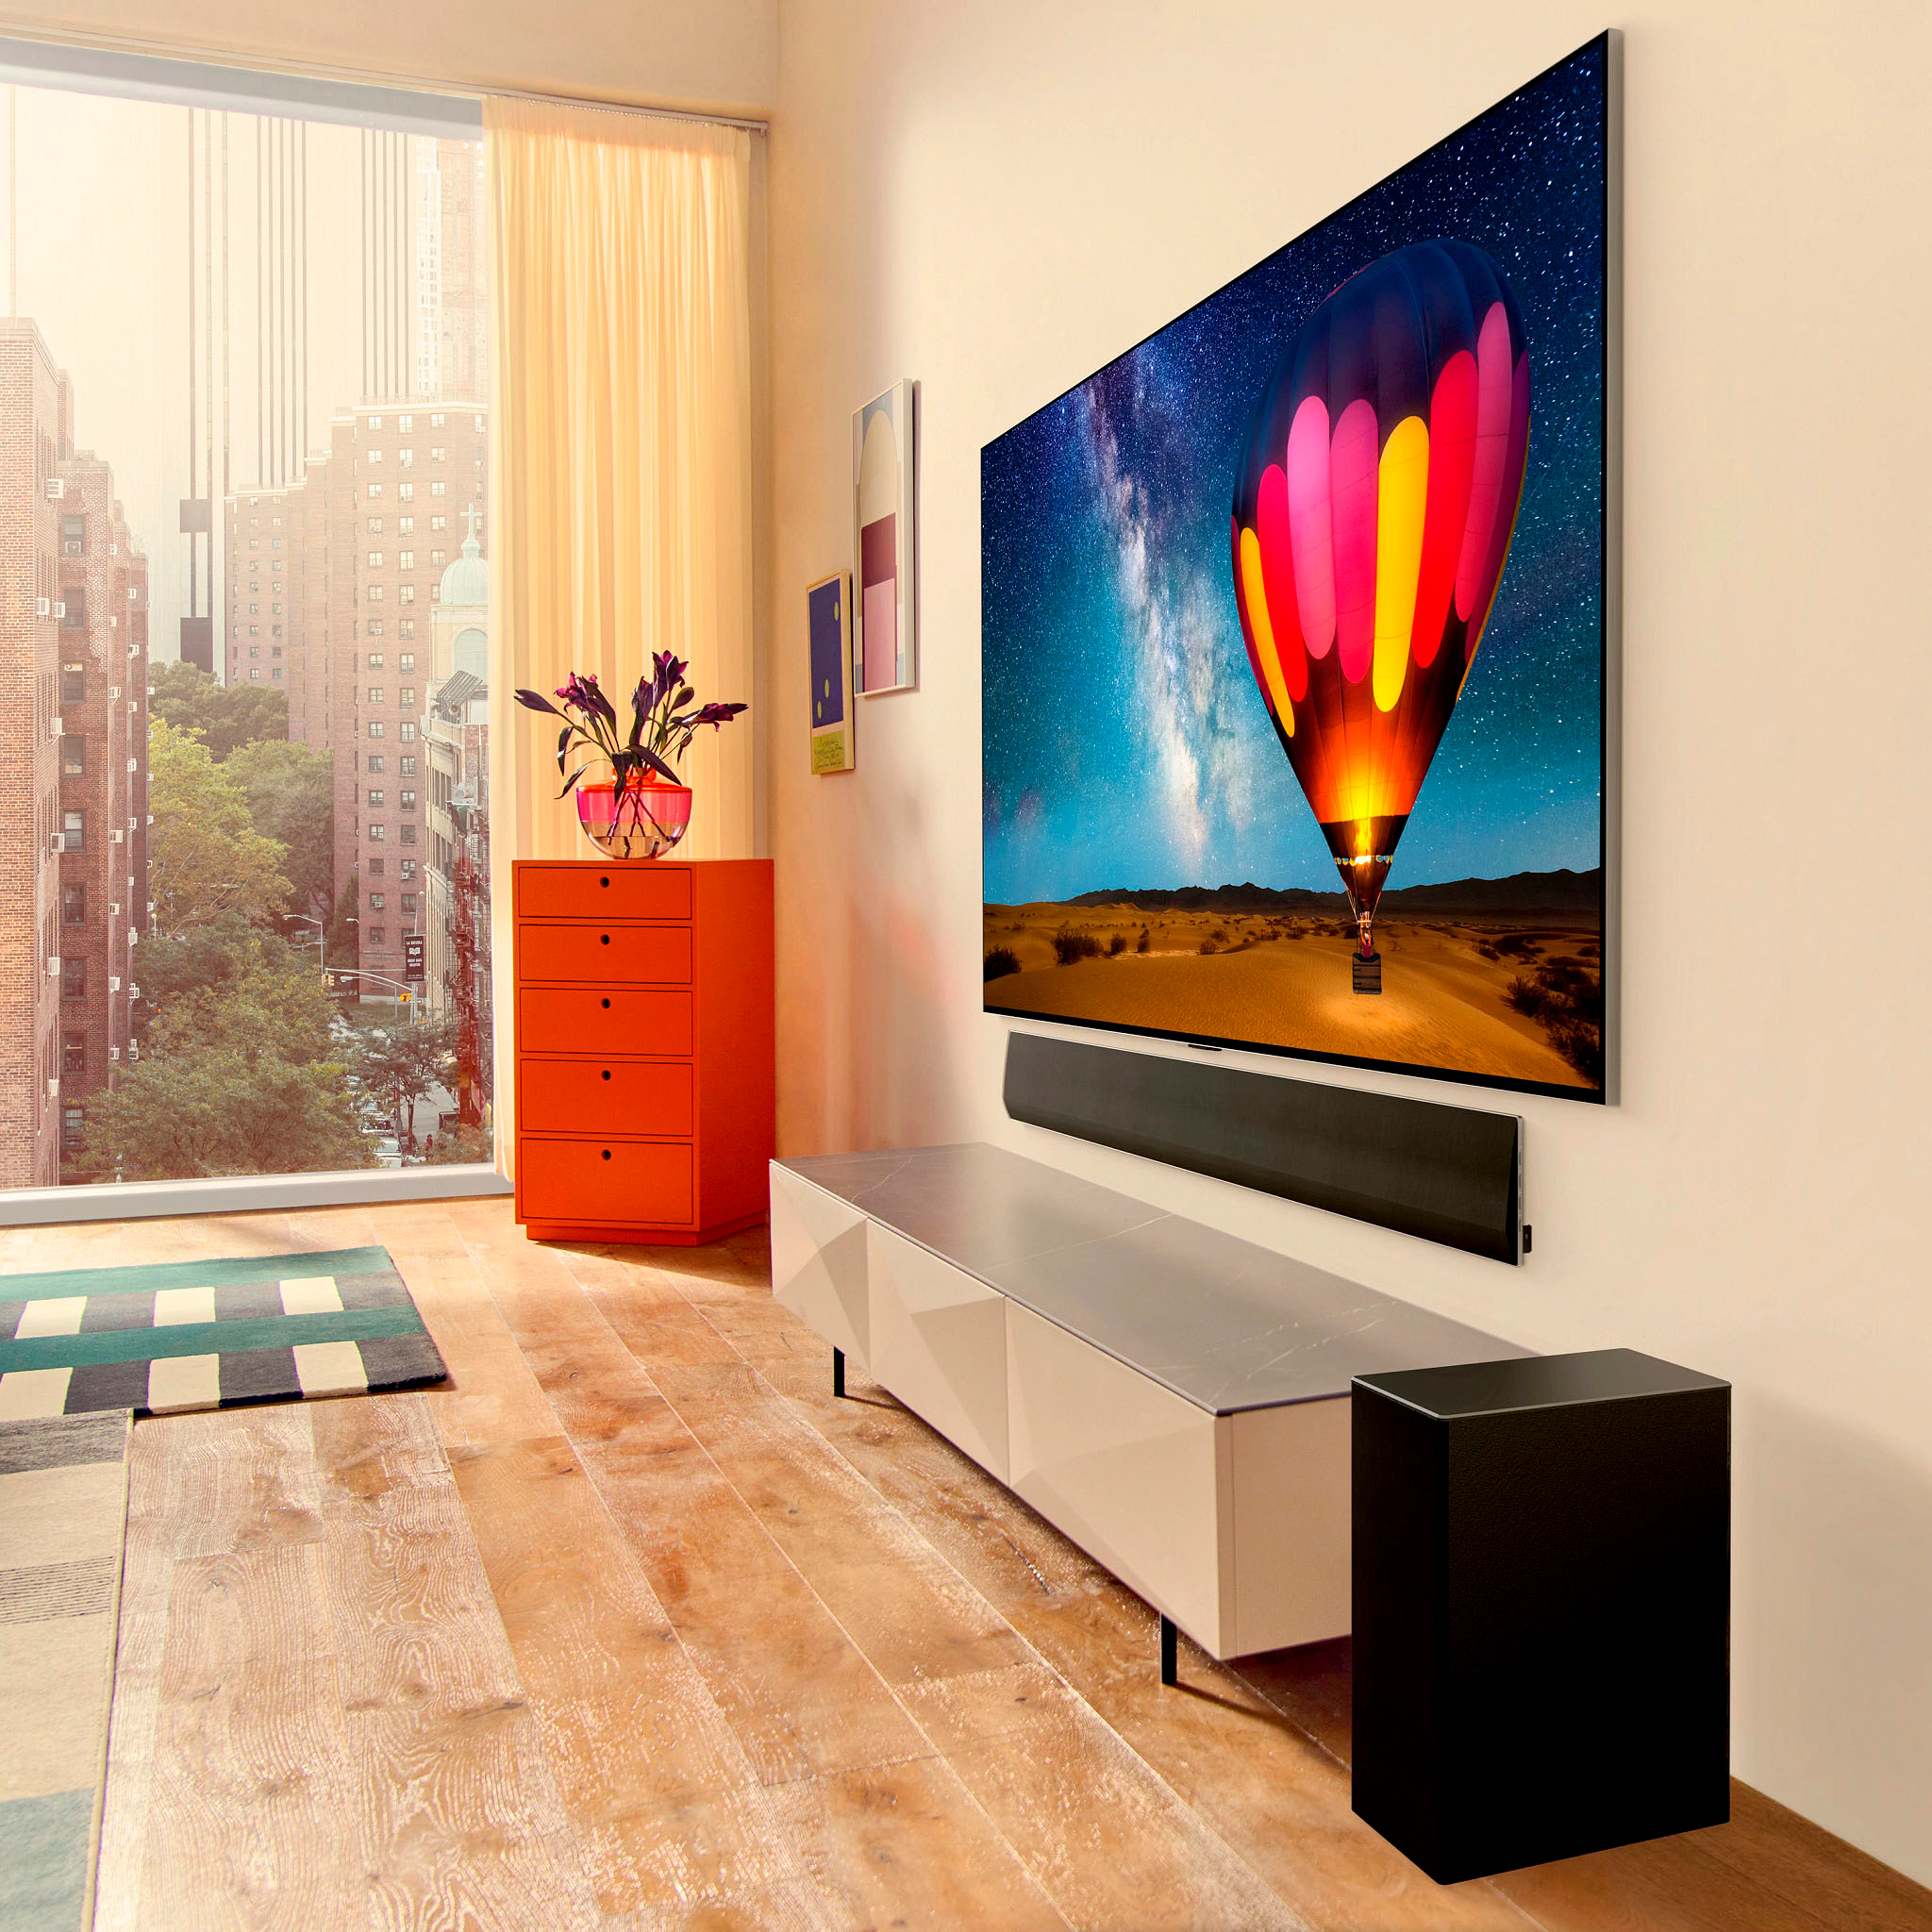 LG 55 Class G3 Series OLED 4K UHD Smart webOS TV with One Wall